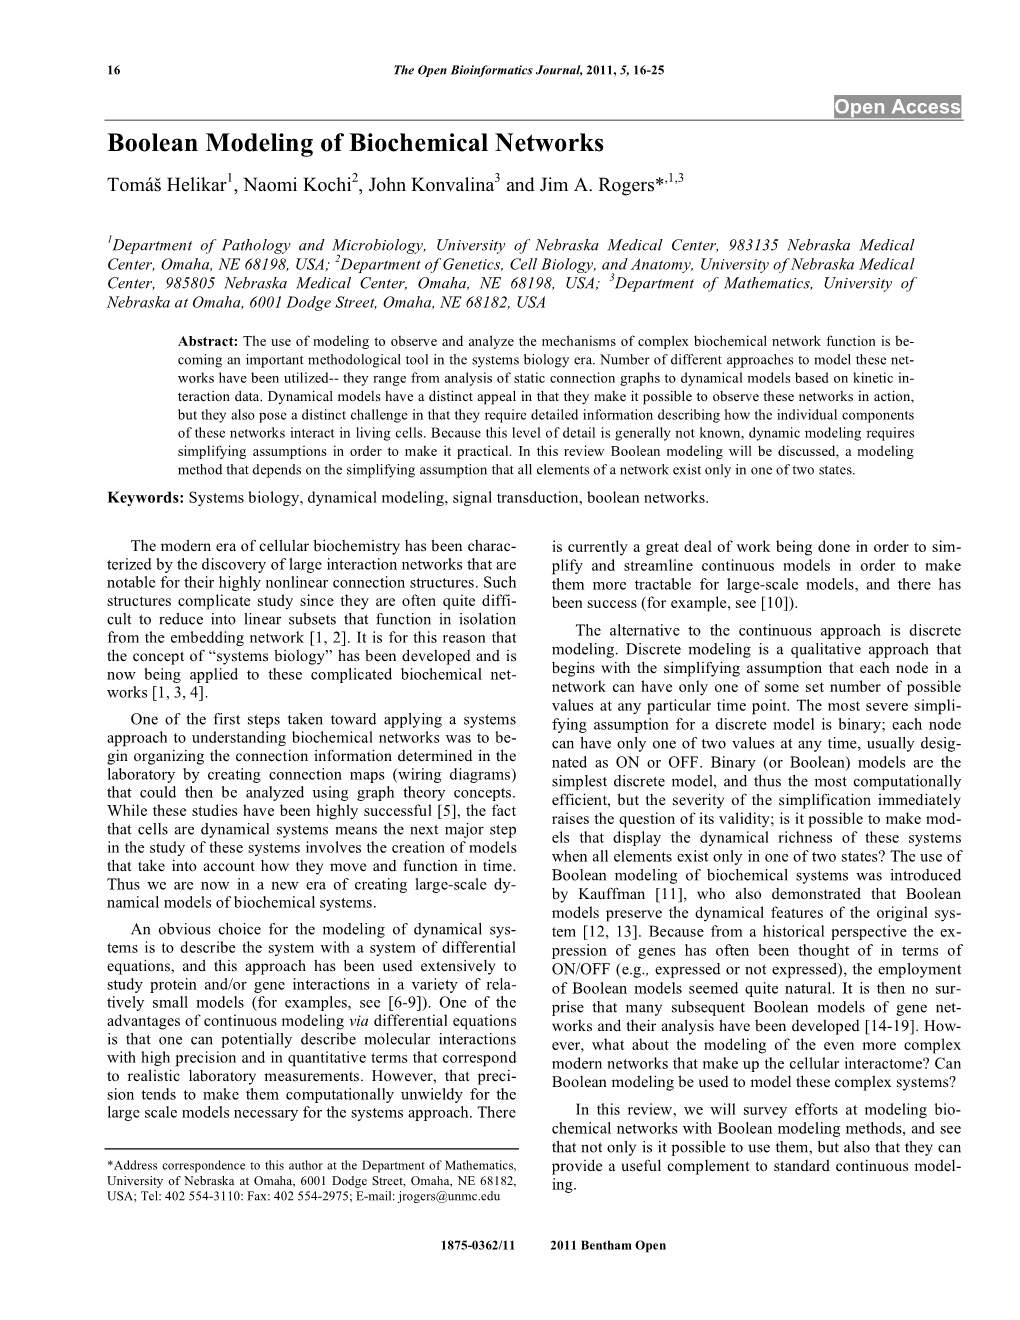 Boolean Modeling of Biochemical Networks Tomá Helikar1, Naomi Kochi2, John Konvalina3 and Jim A